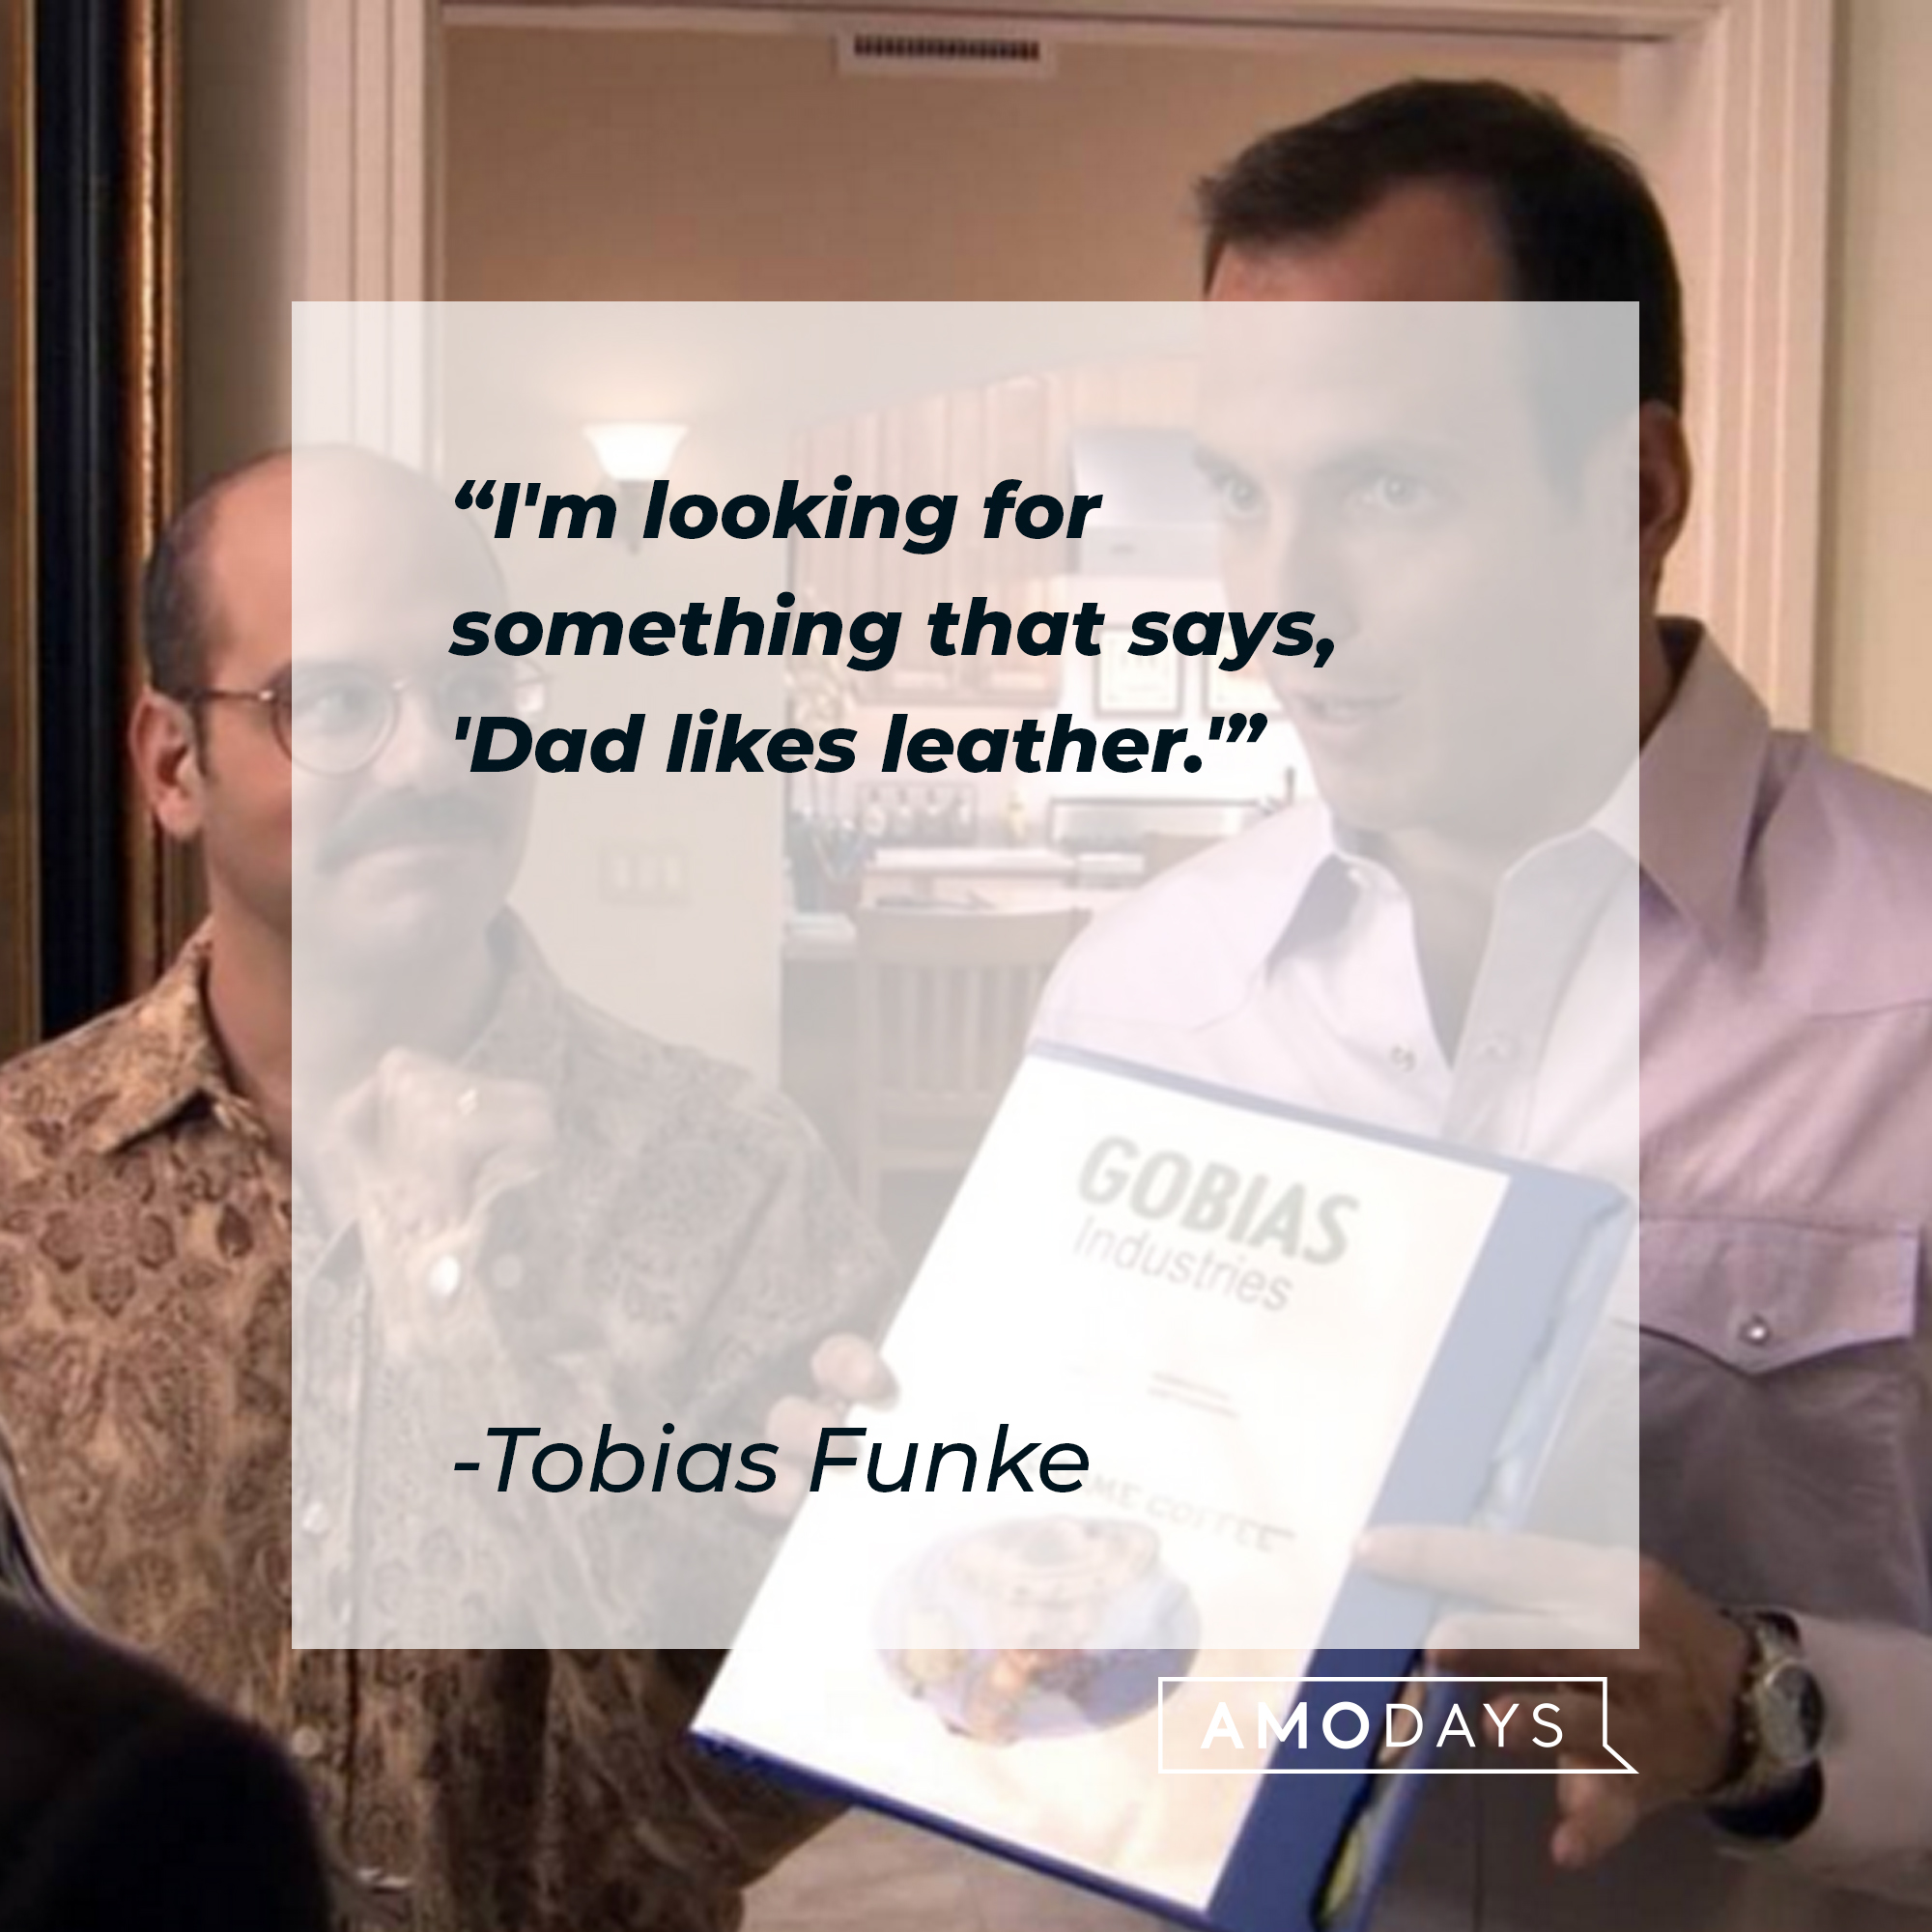 Tobias Funke's quote: "I'm looking for something that says, 'Dad likes leather.'" | Source: Facebook.com/ArrestedDevelopment